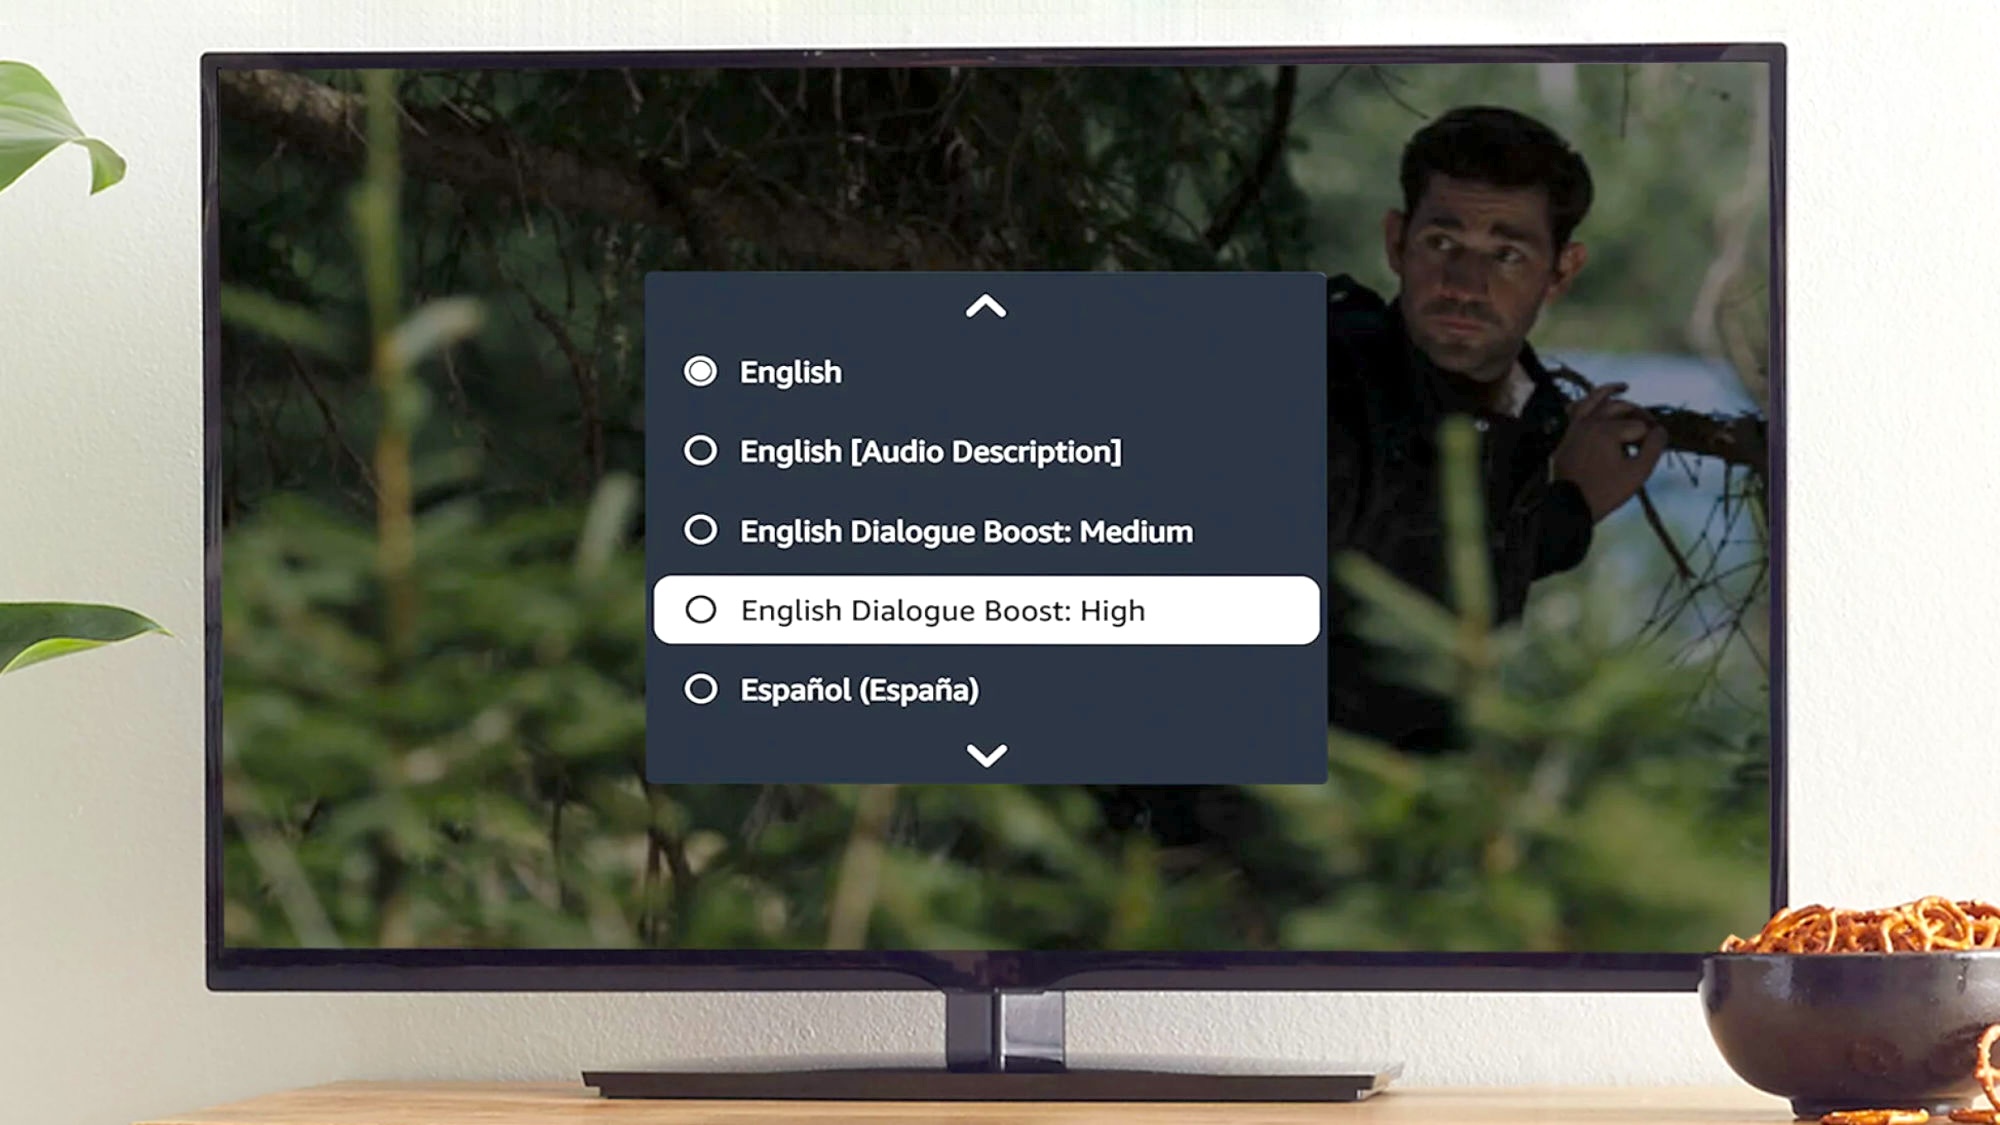 This new feature from Amazon Prime Video allows us to hear series much better than before